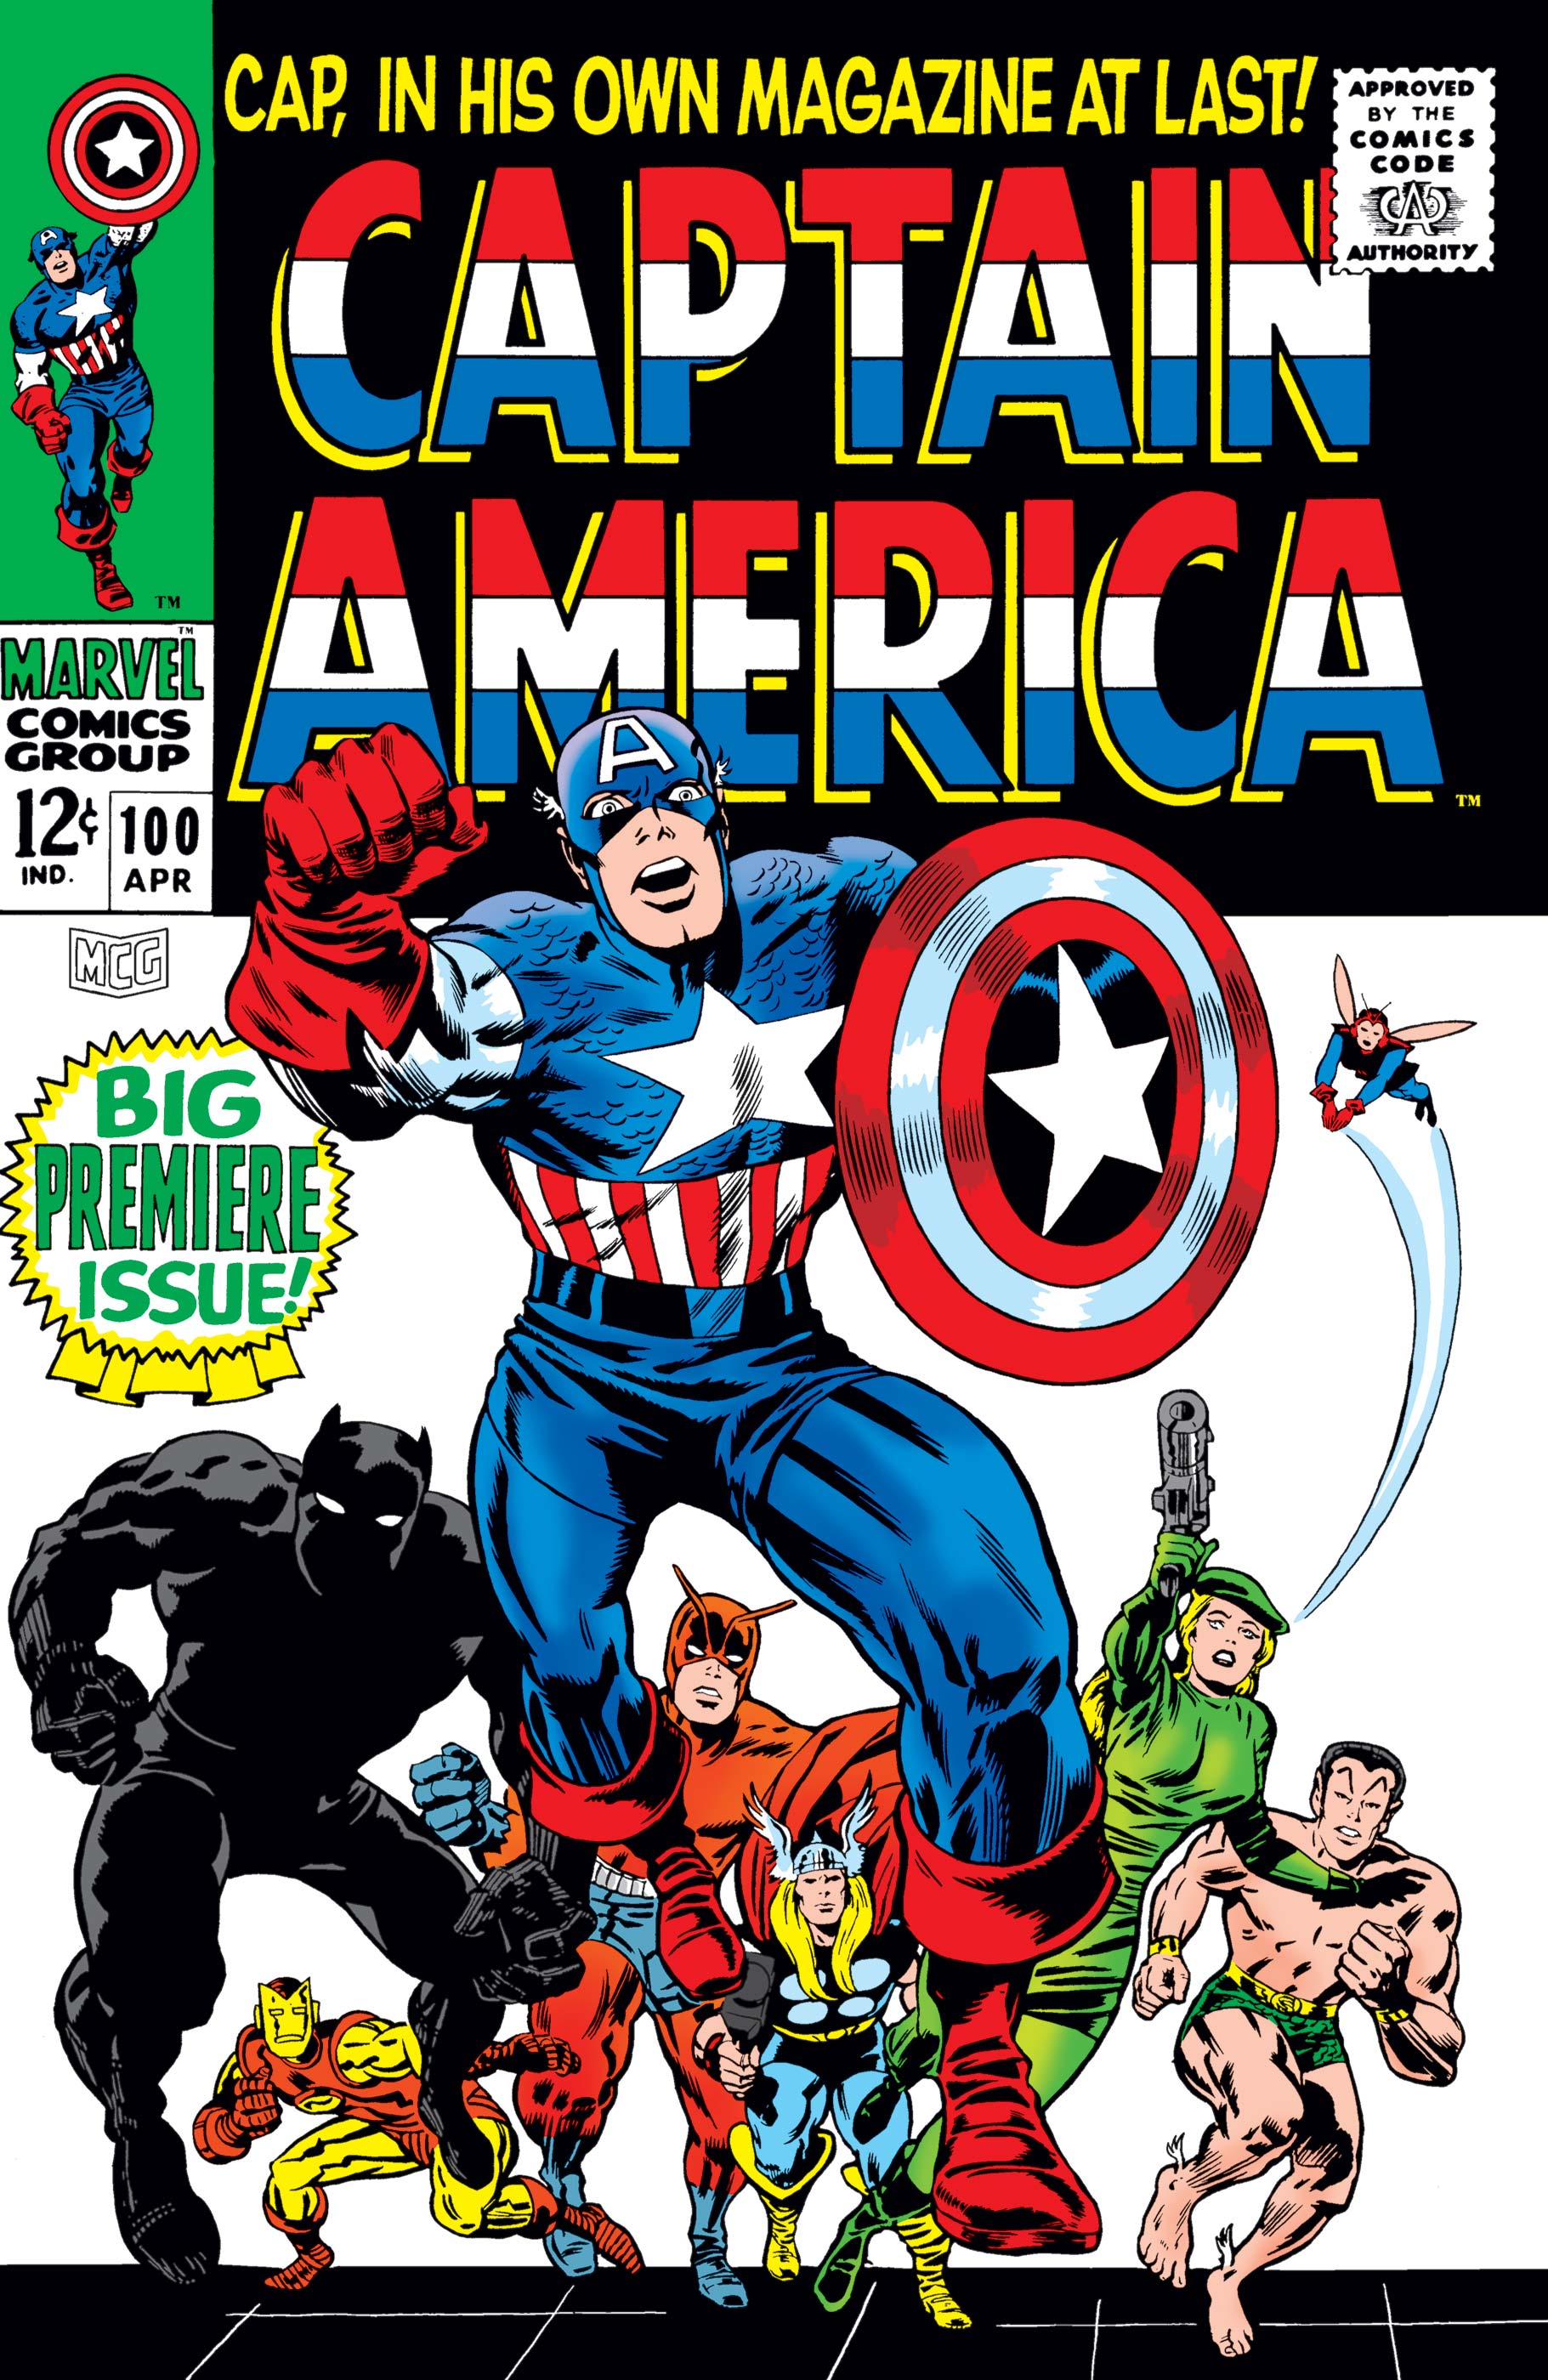 TIN SIGN Issue #100 Details about   Marvel™ CLASSICS Comic Book CAPTAIN AMERICA 